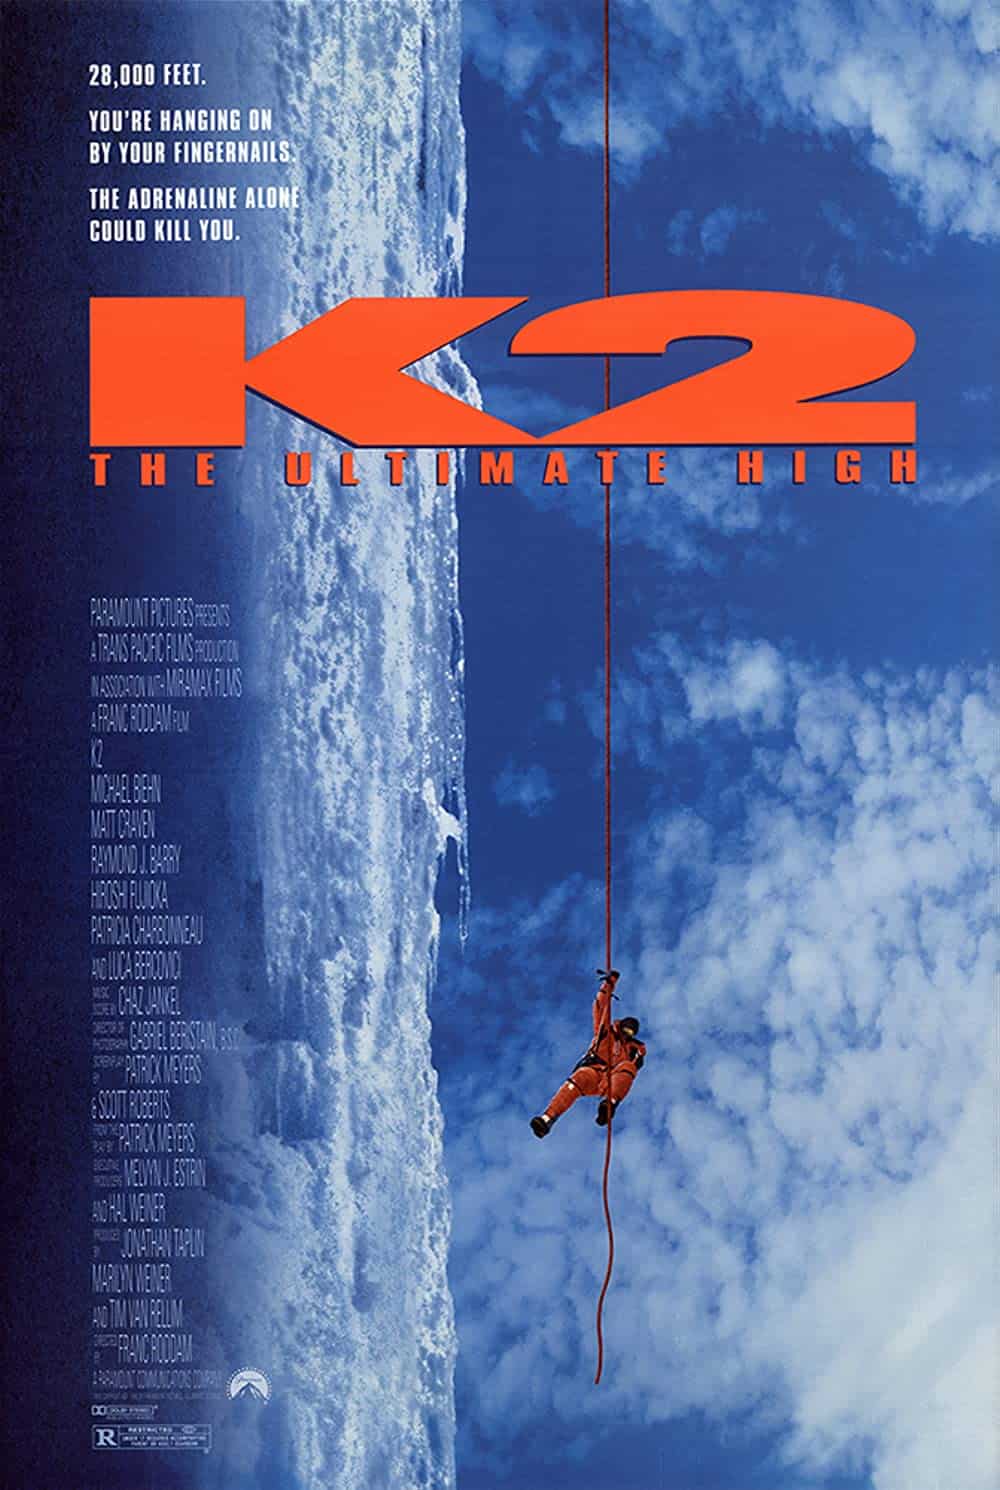 K2 (1991) Best Mountaineering Movies You Can't Miss